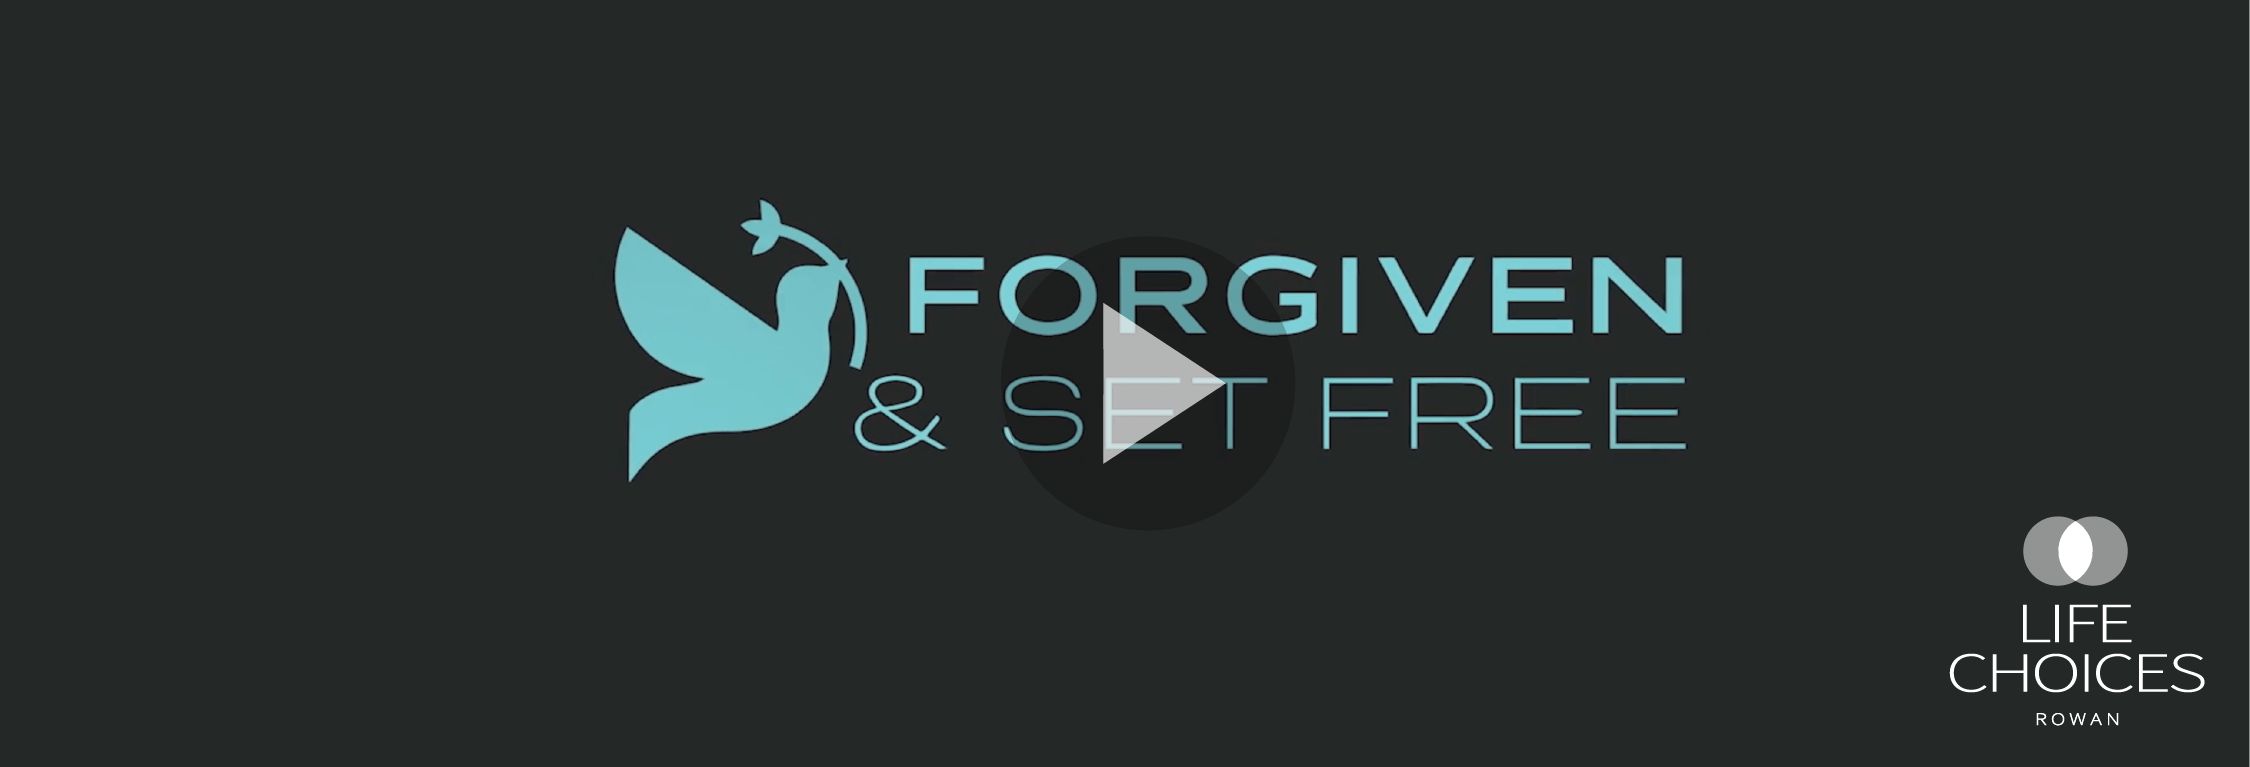 LCR Forgiven & Free Video Image with Link 